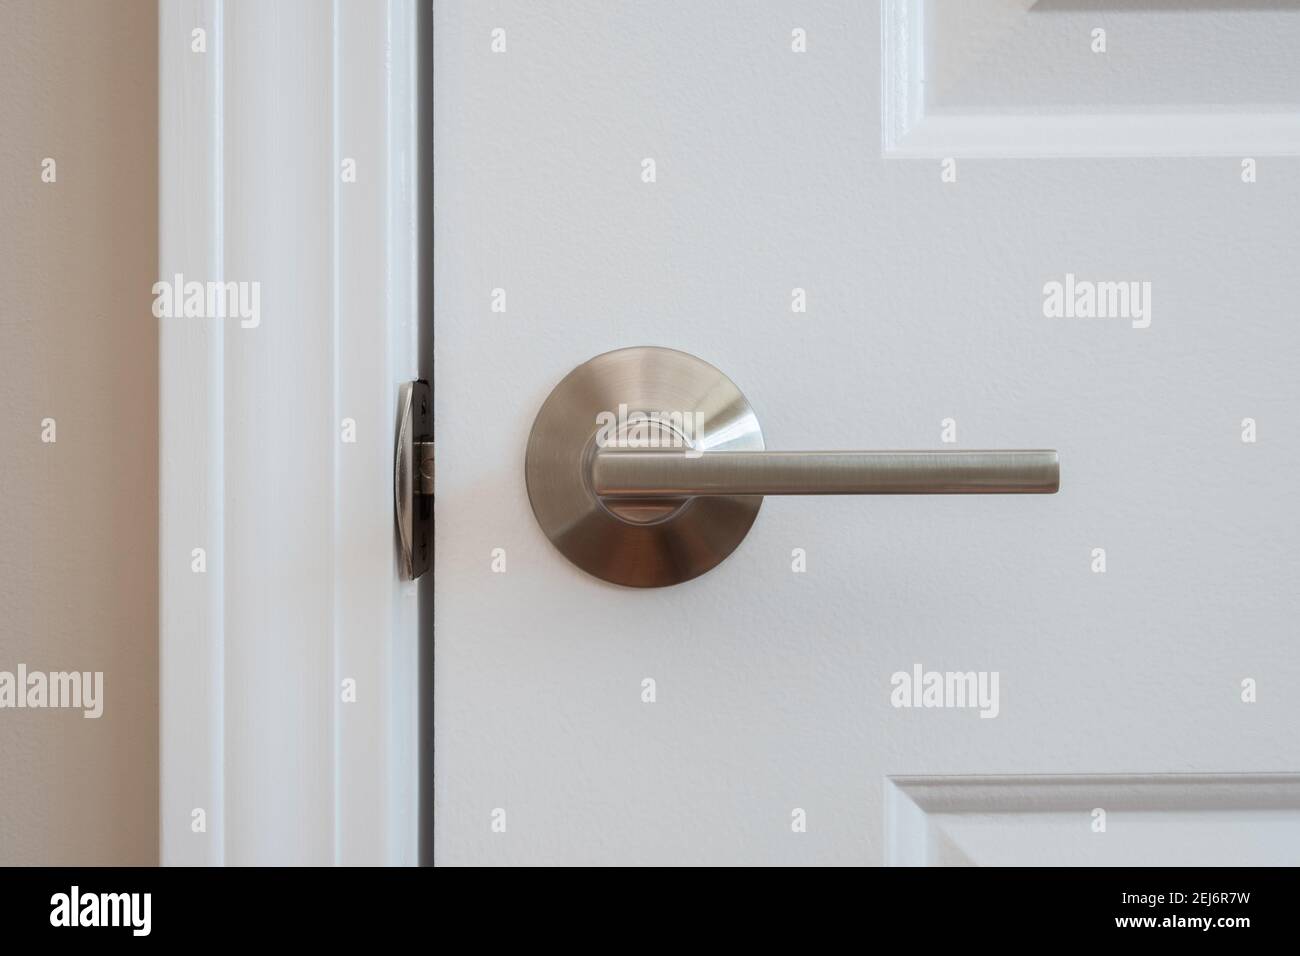 Photograph of a modern styled nickel closet door lever Stock Photo